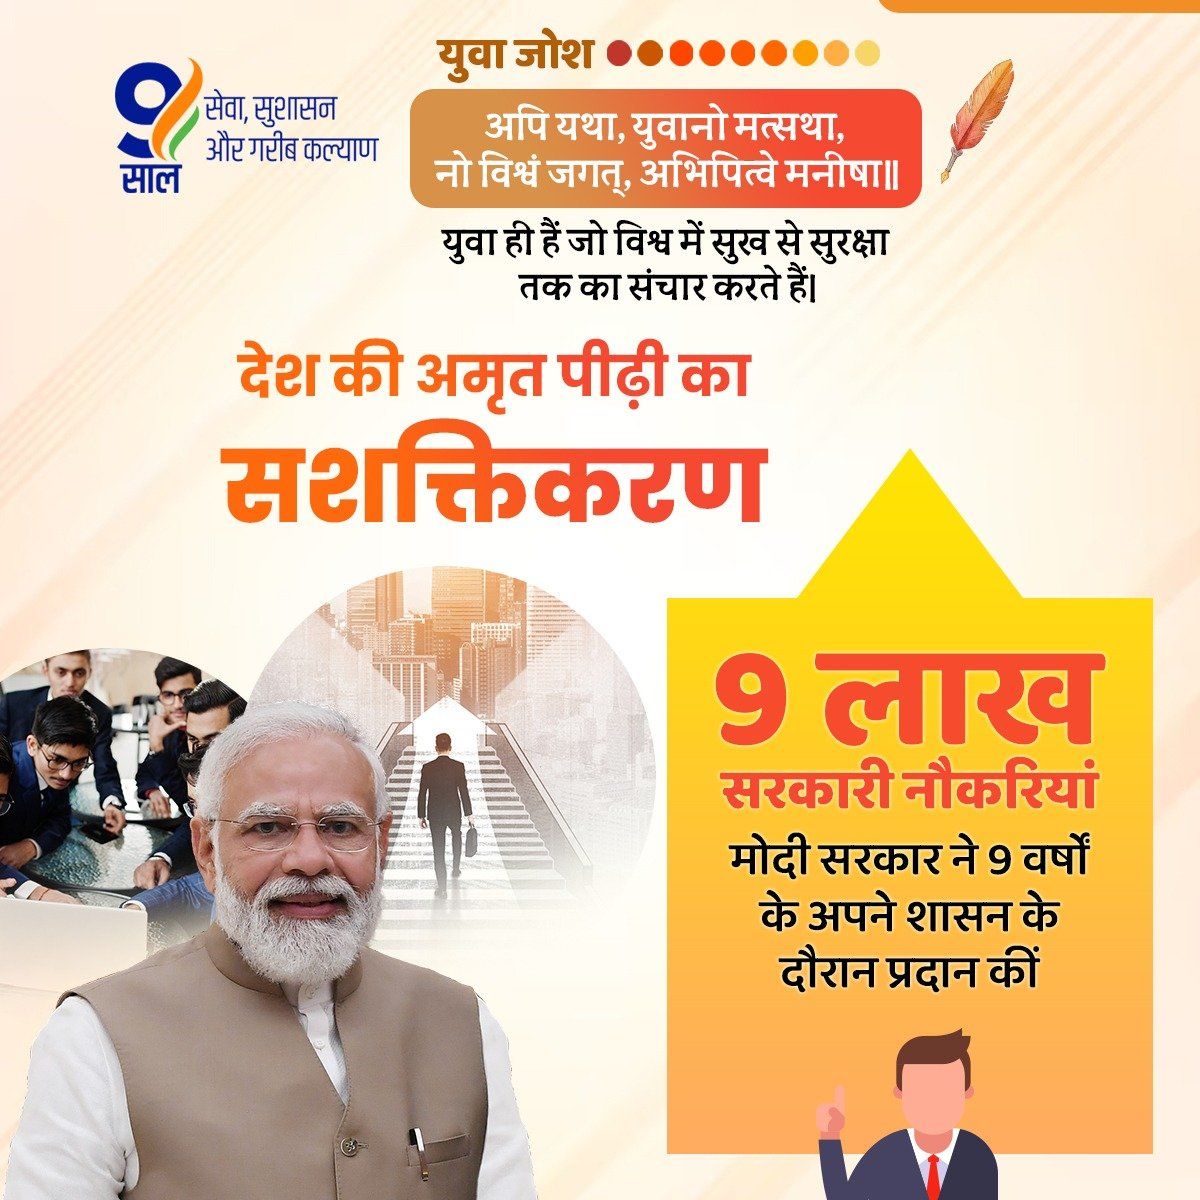 PM Modi's emphasis on sports has inspired a generation of young athletes, promoting a culture of fitness, discipline, and excellence. #YuvaJoshKe9Saal